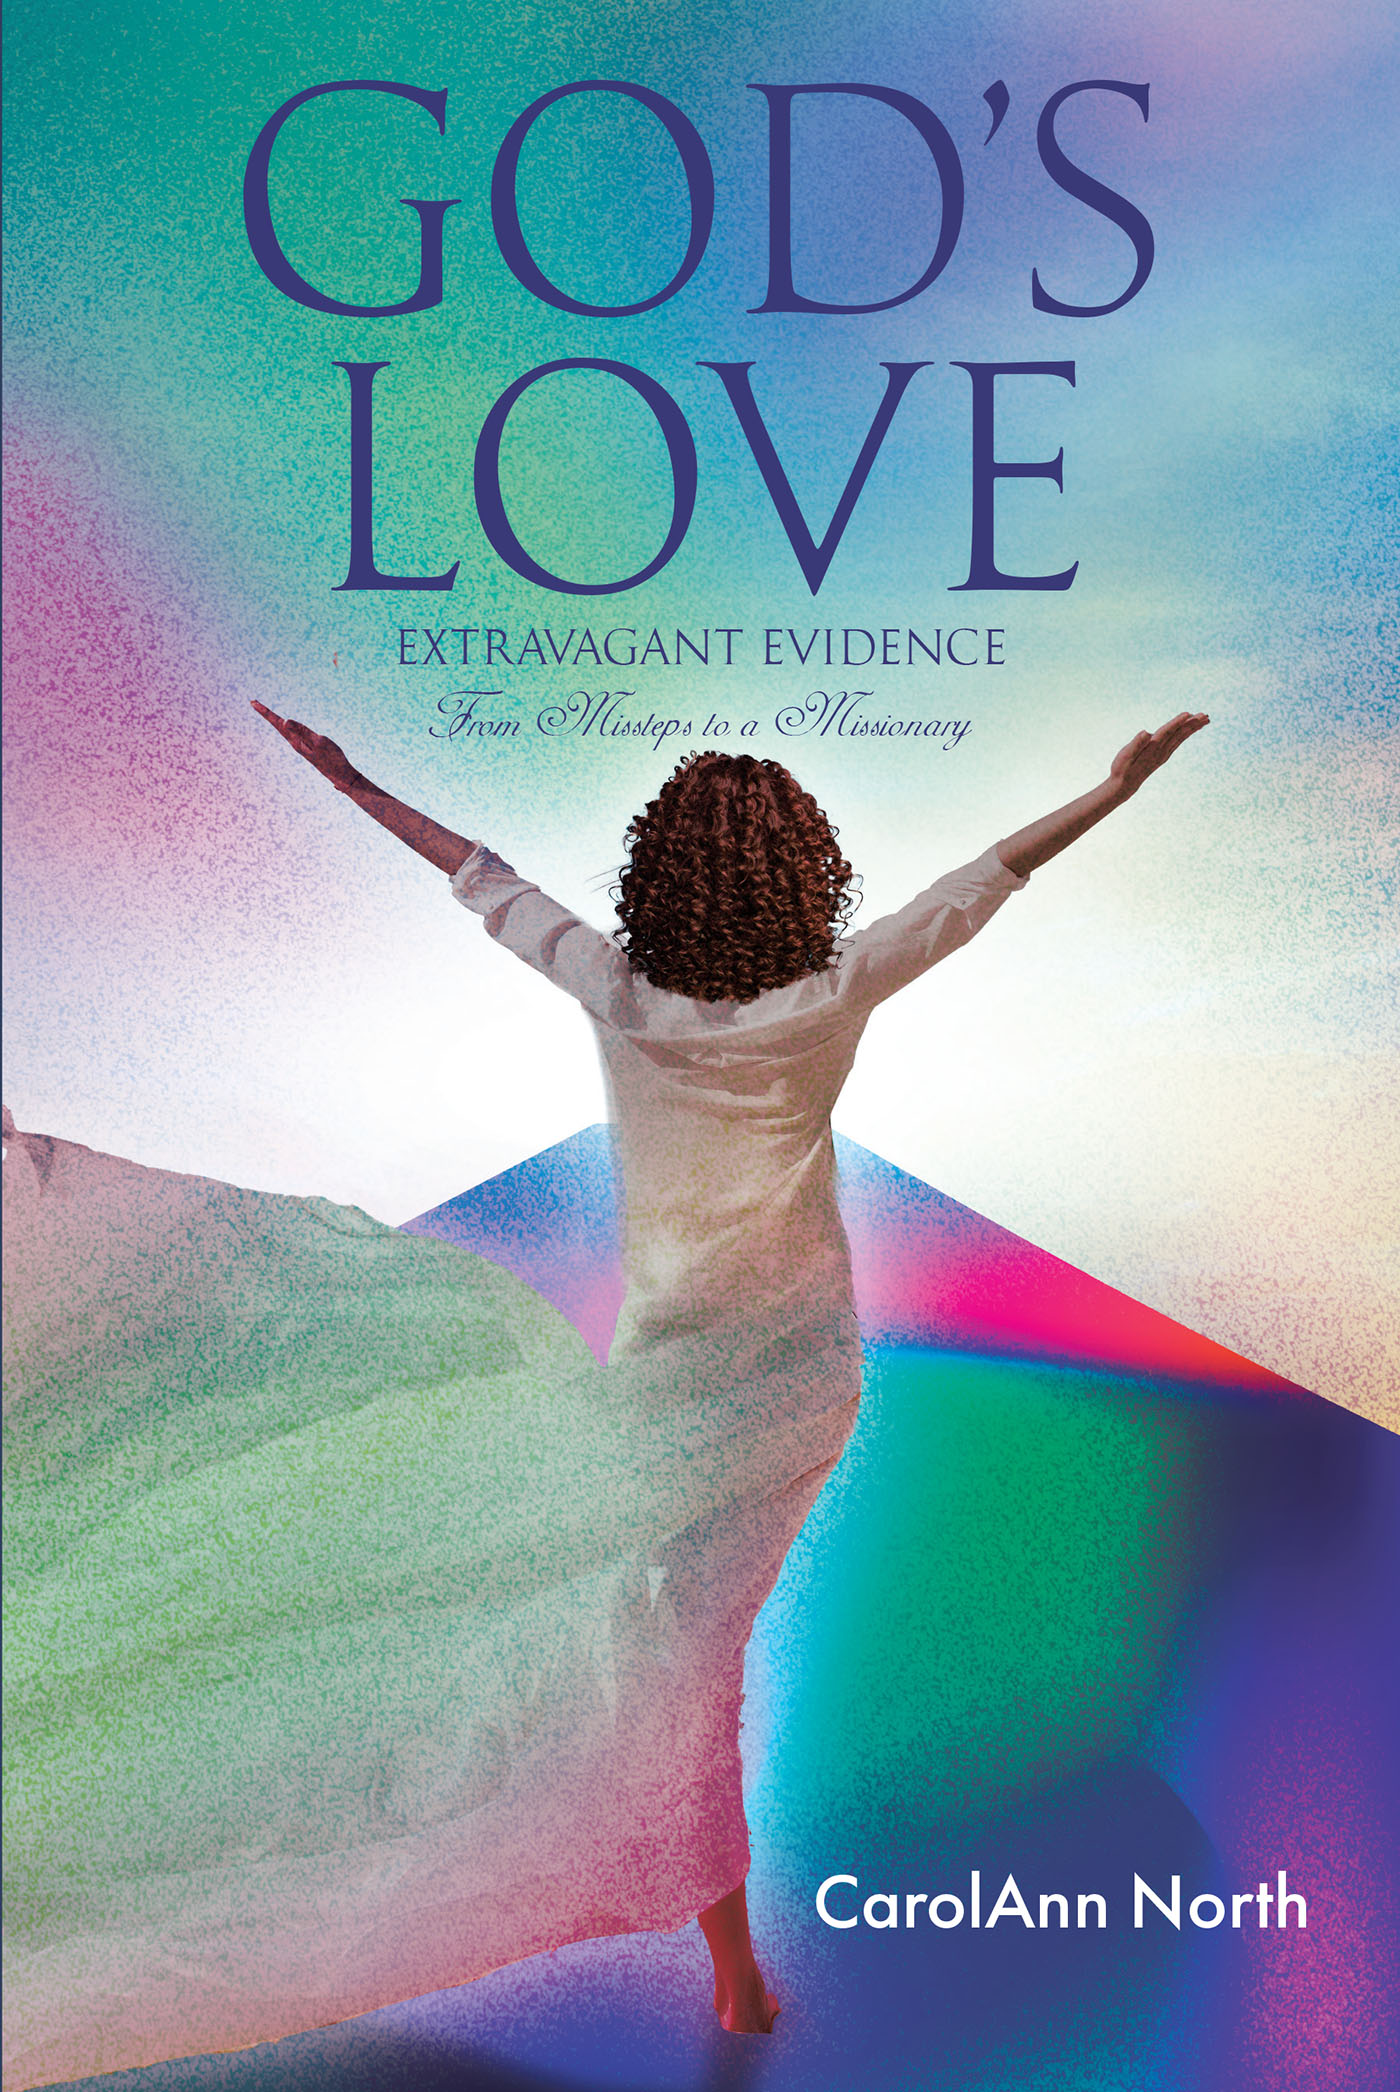 CarolAnn North’s Newly Released “God’s Love: Extravagant Evidence From Missteps to a Missionary” is an Engaging Look Into the Author’s Personal Journey